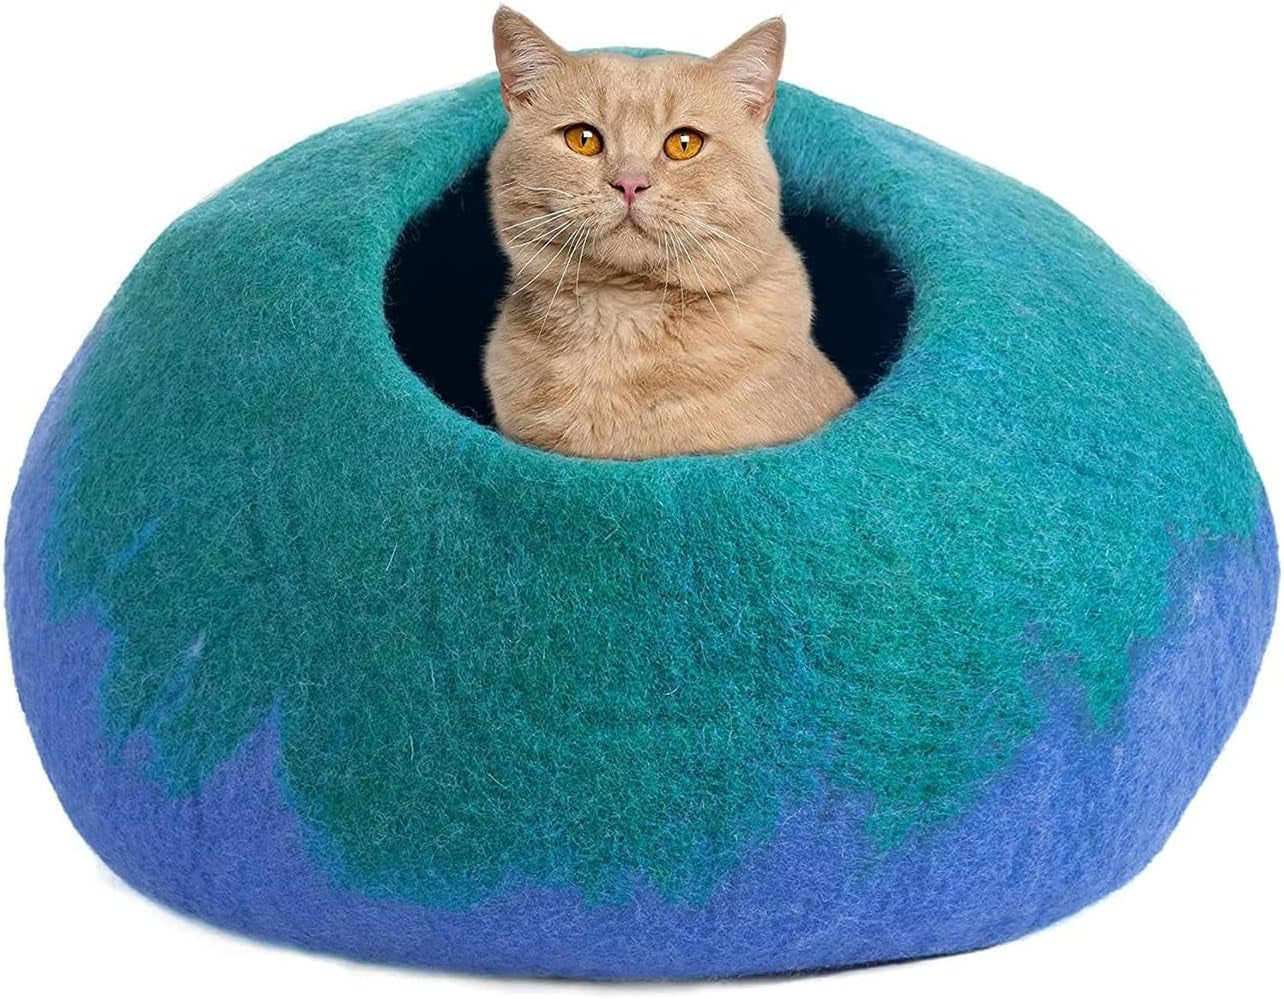 Wool Cat Cave Bed for Cat Lovers - Handmade Premium Felt Cat Bed Cave (Large) - 100% Marino Wool Cat Cave for Indoor Cats and Kittens (Green/Blue)